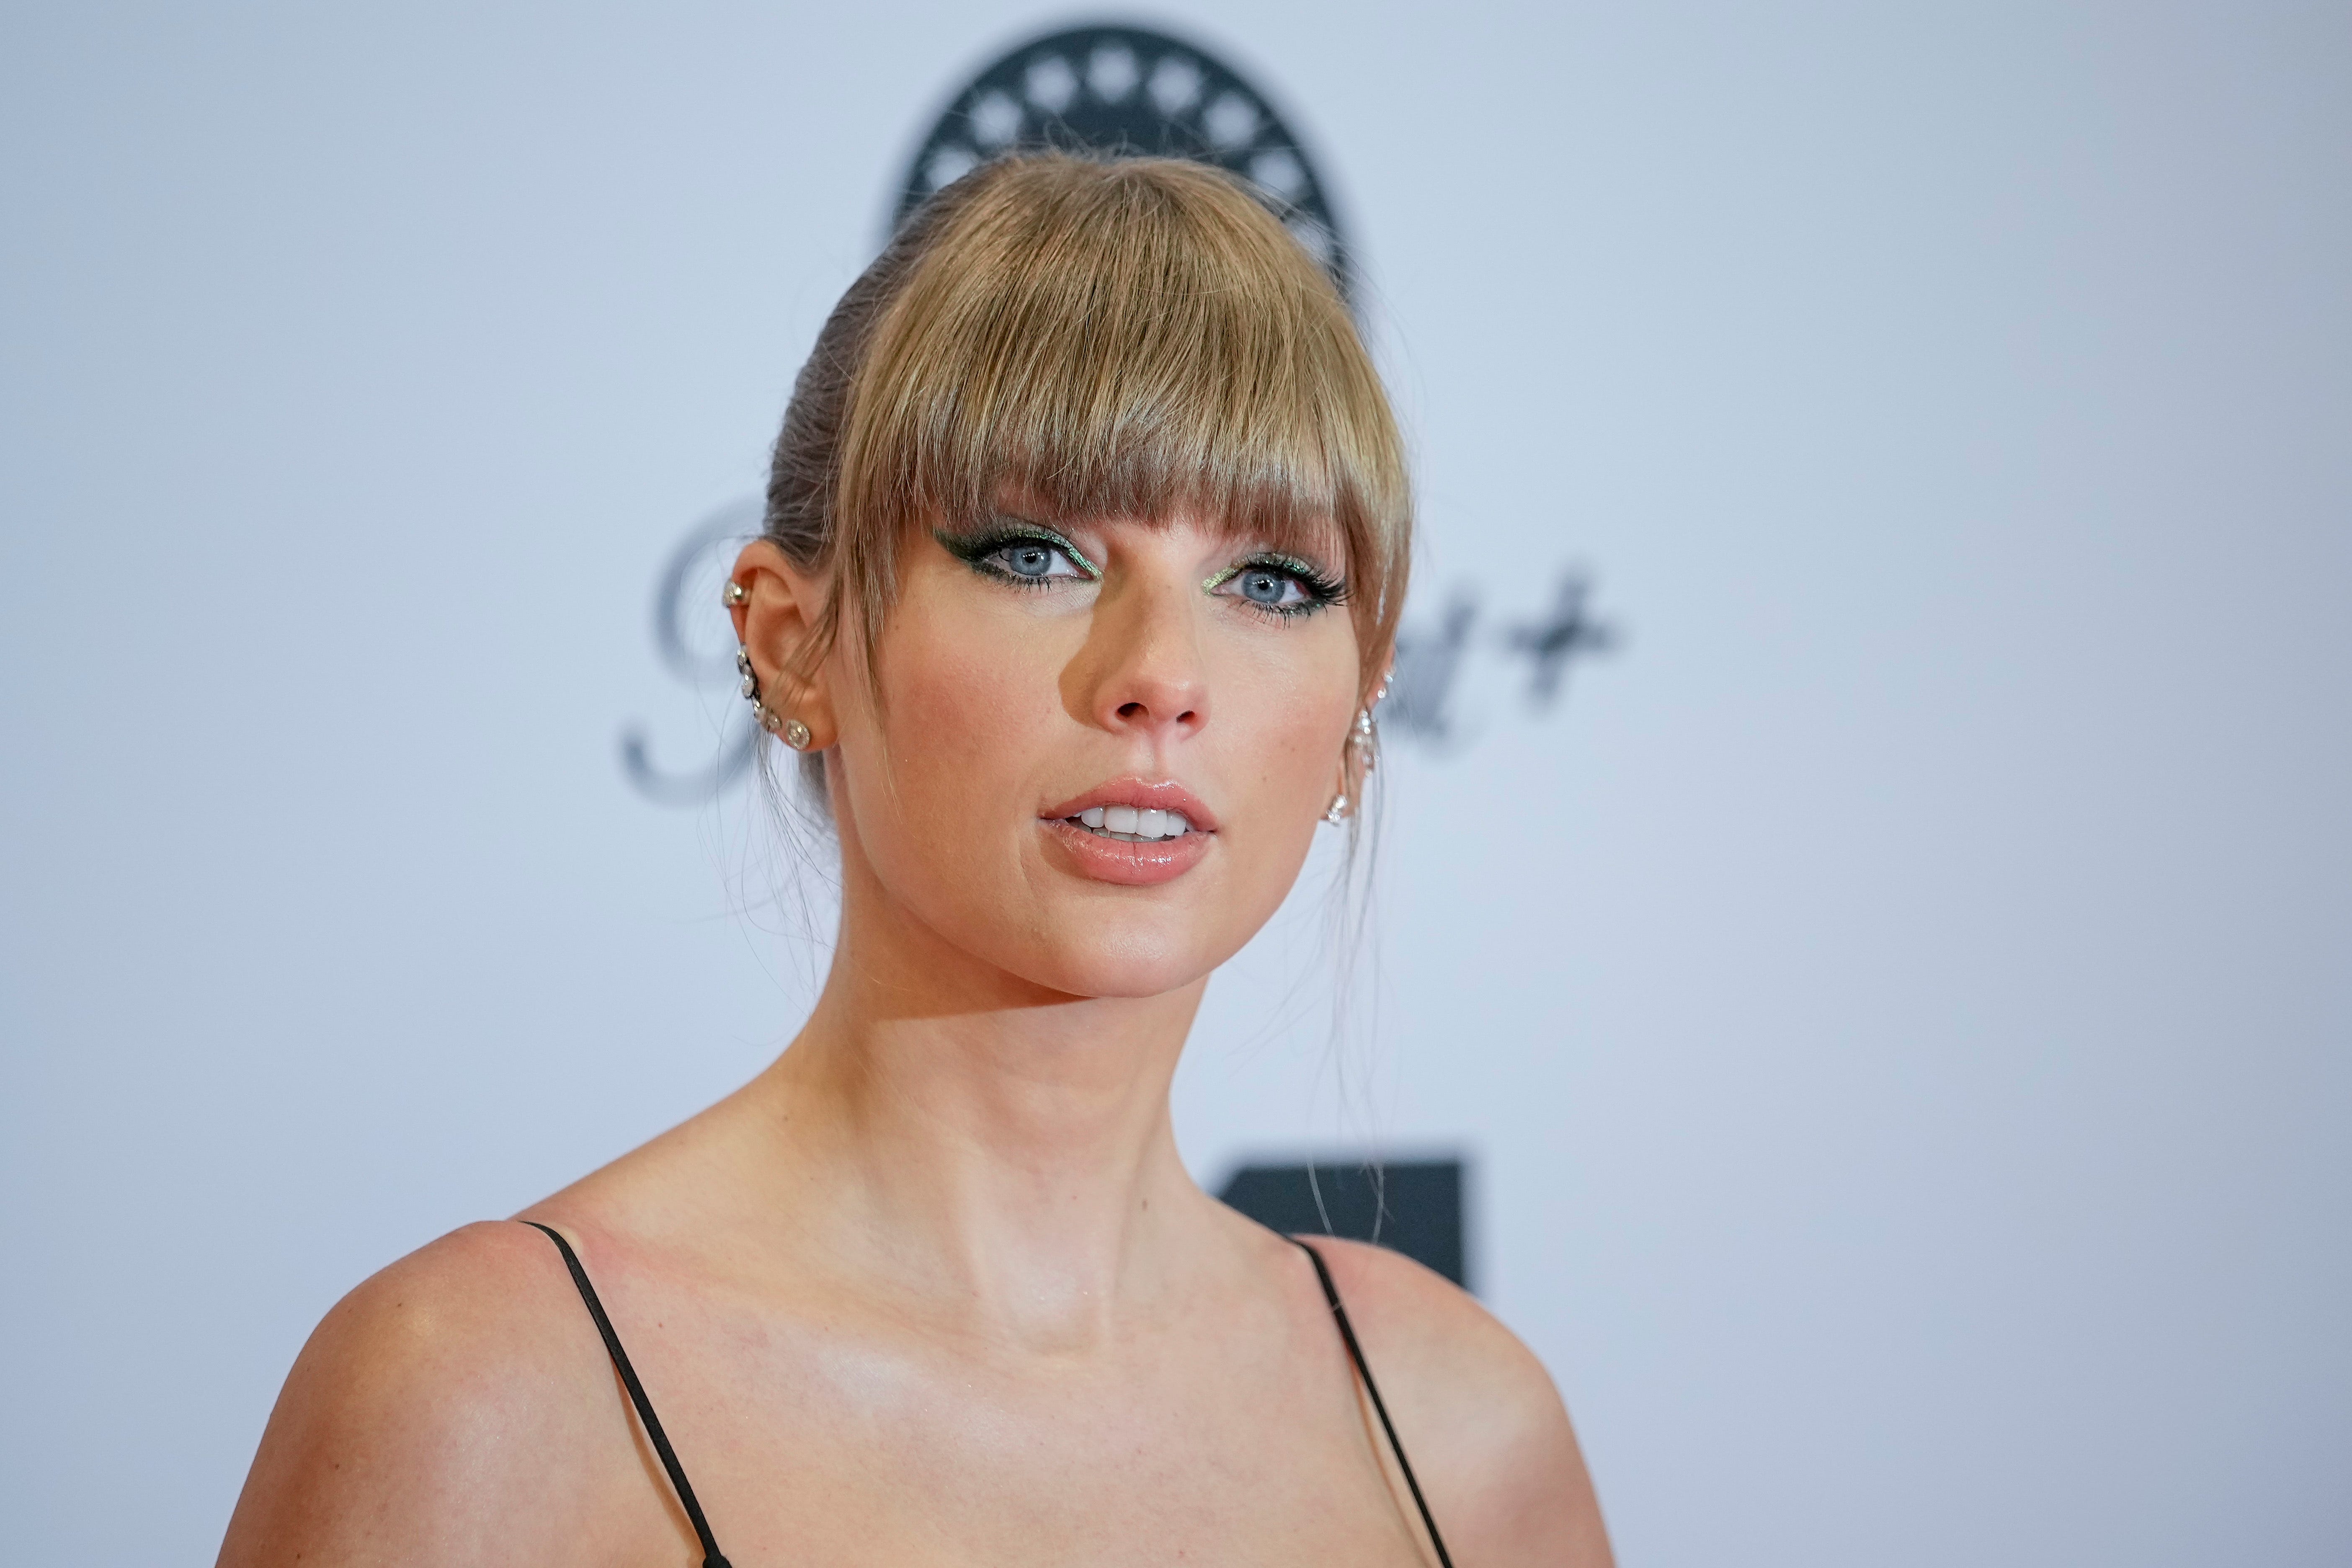 'Industrial-scale ticket scalping.' Senators grill Ticketmaster over Taylor Swift concert fiasco